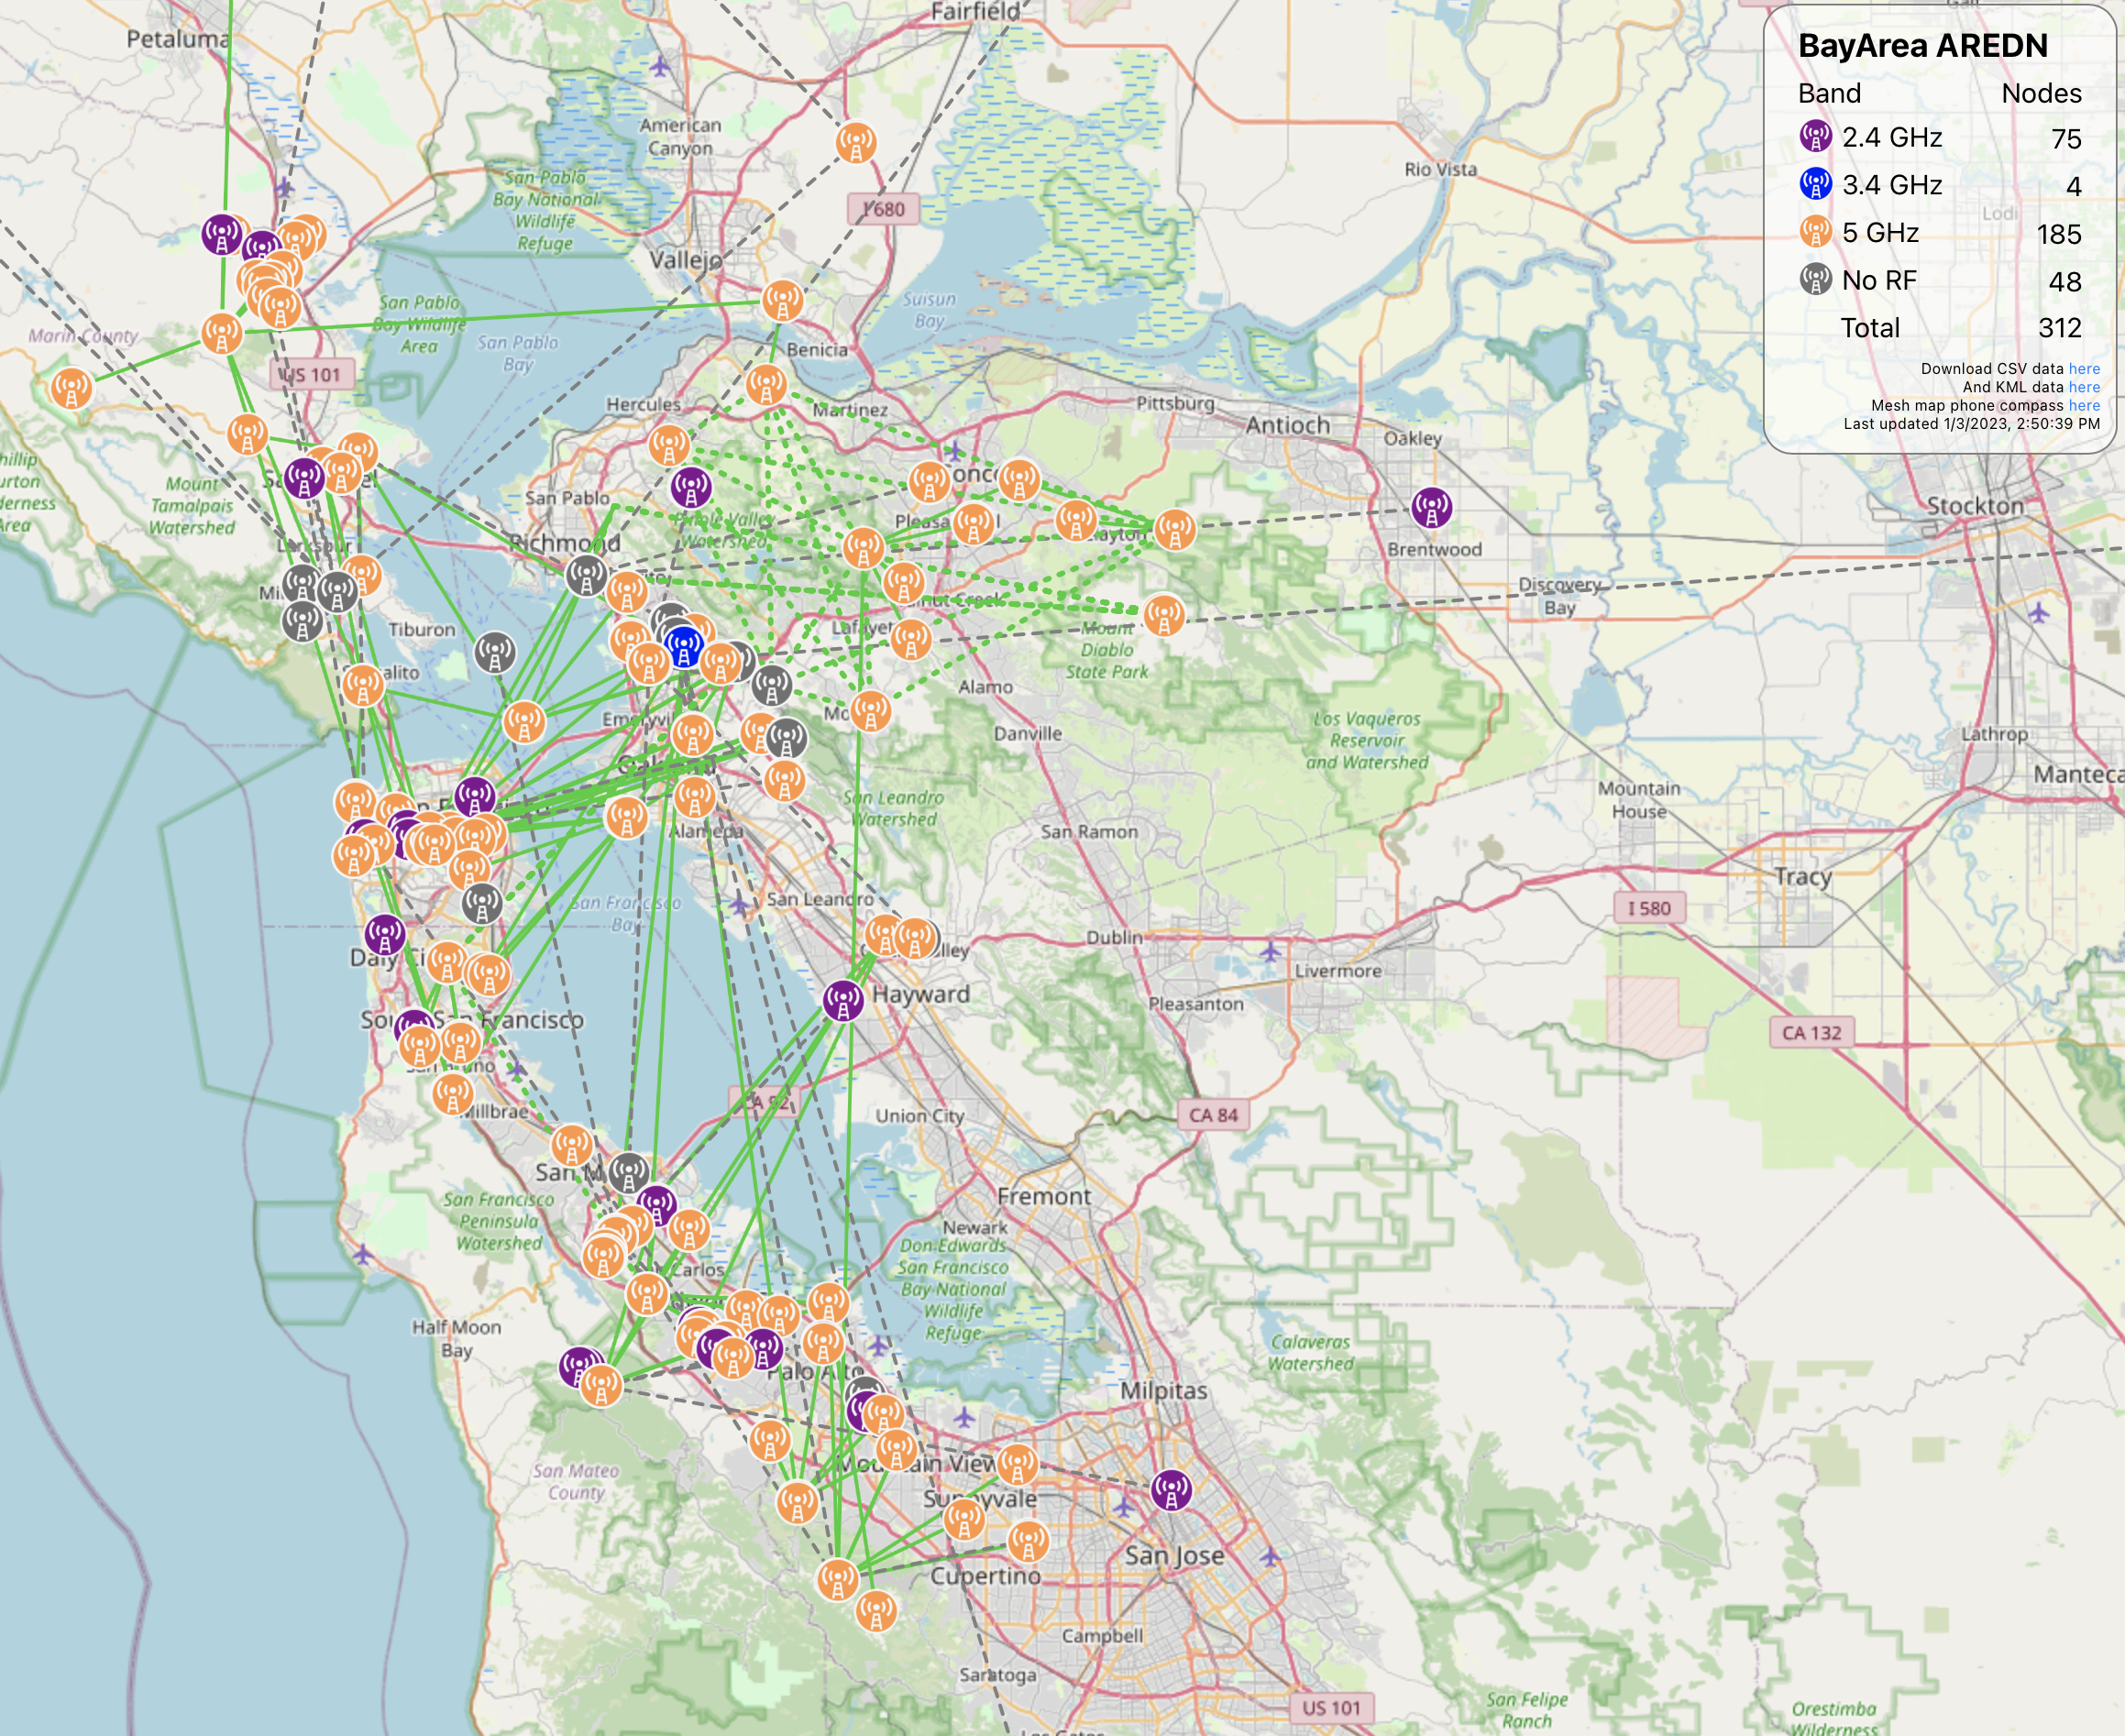 Map depicting the Bay Area Mesh (BAM) network in the San Francisco Bay Area